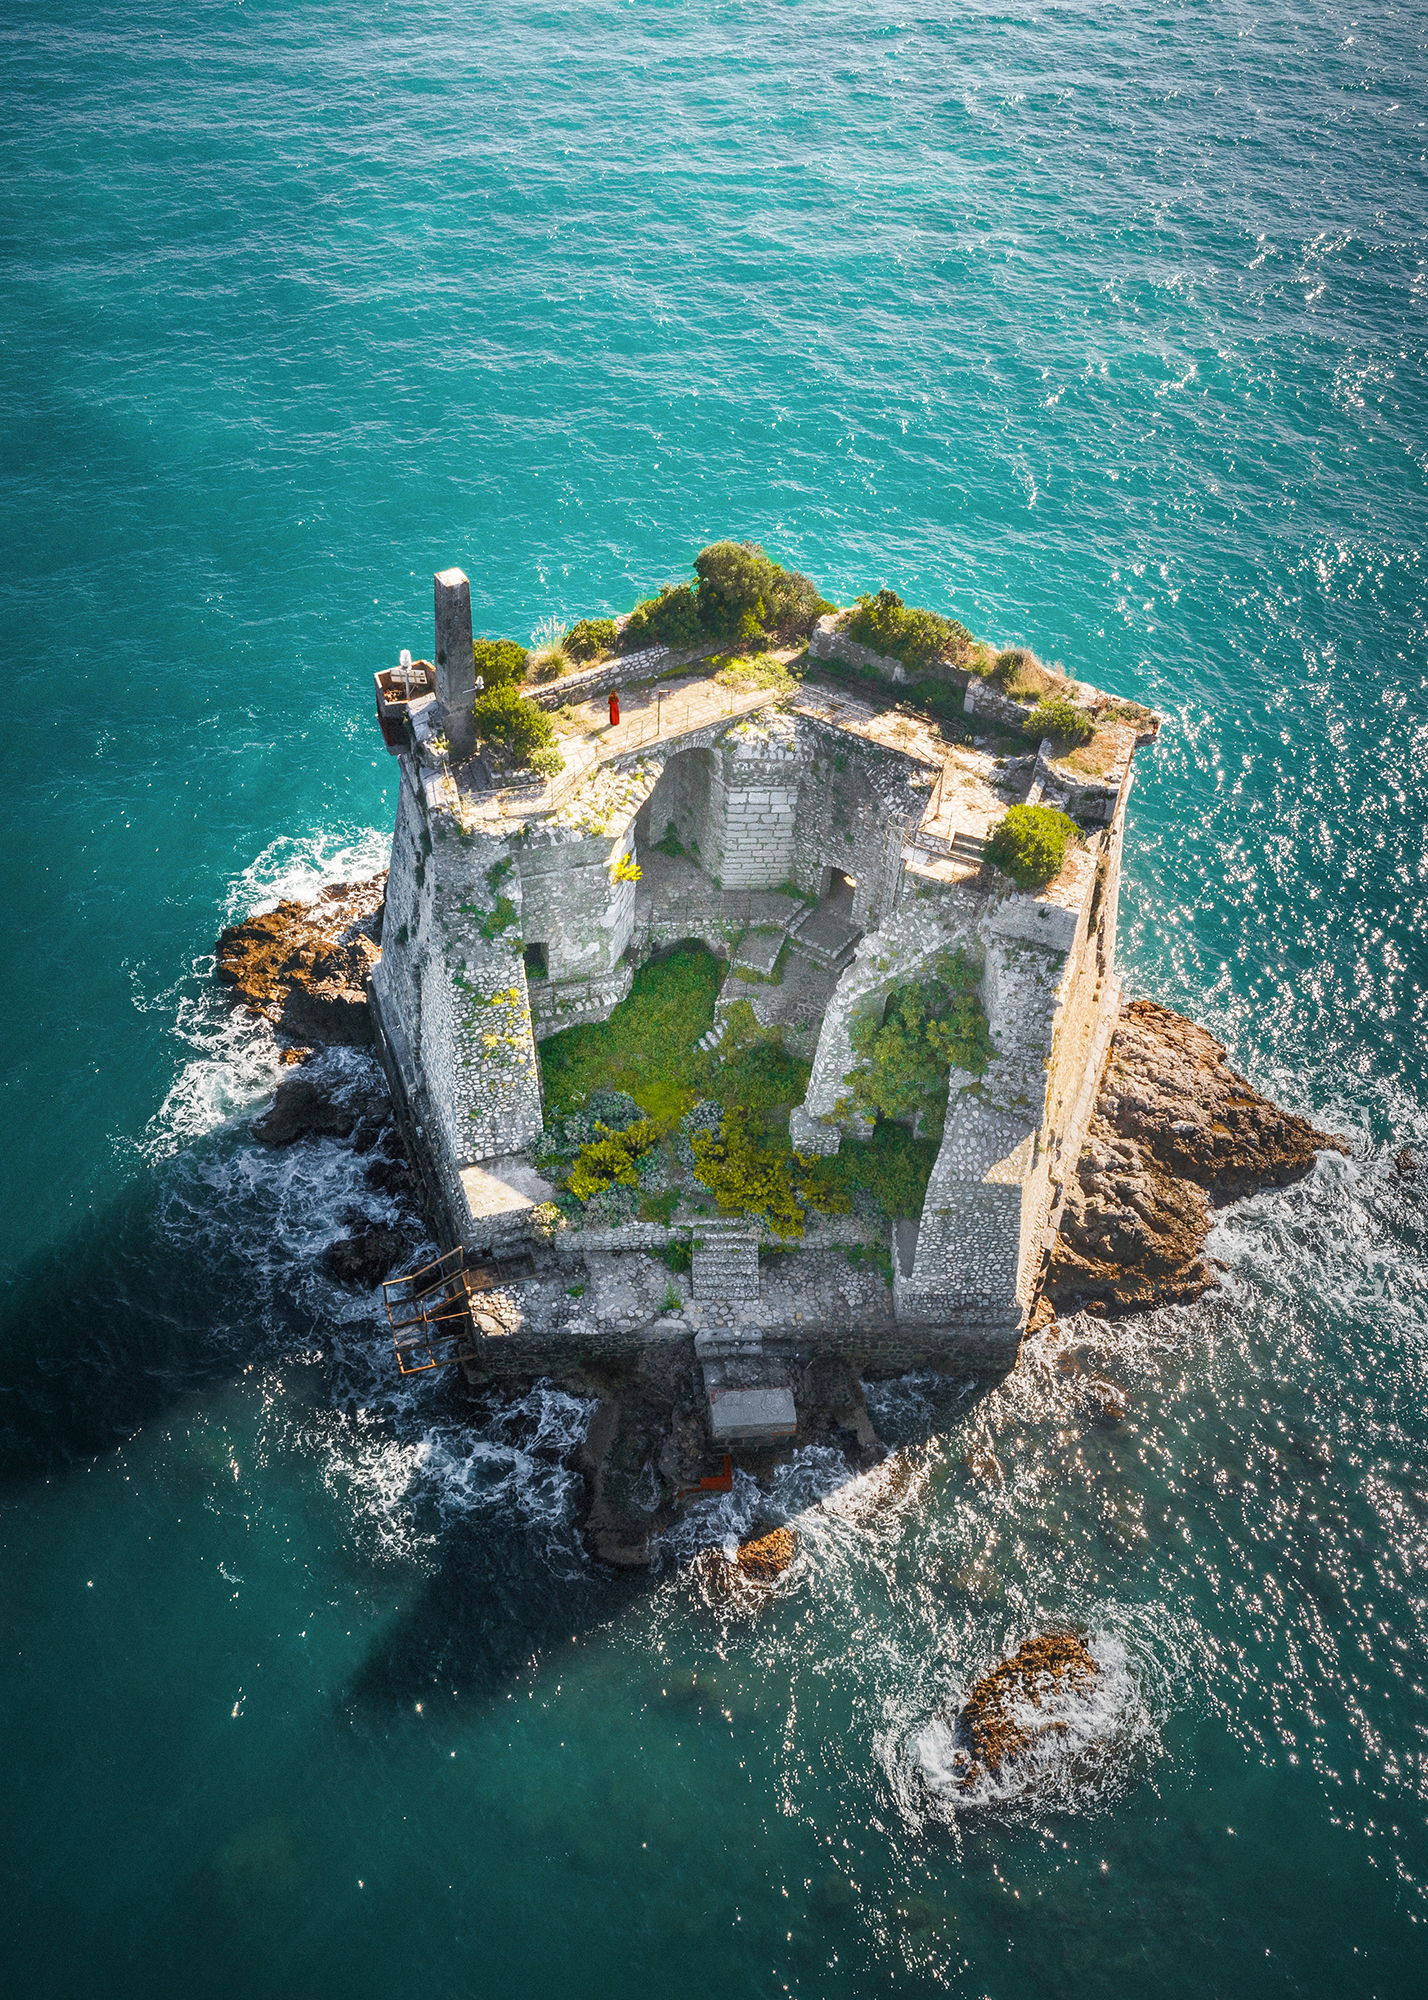 drone photo of old Genoa fortress Scola Tower which is a hidden gem in italy with green water in foreground